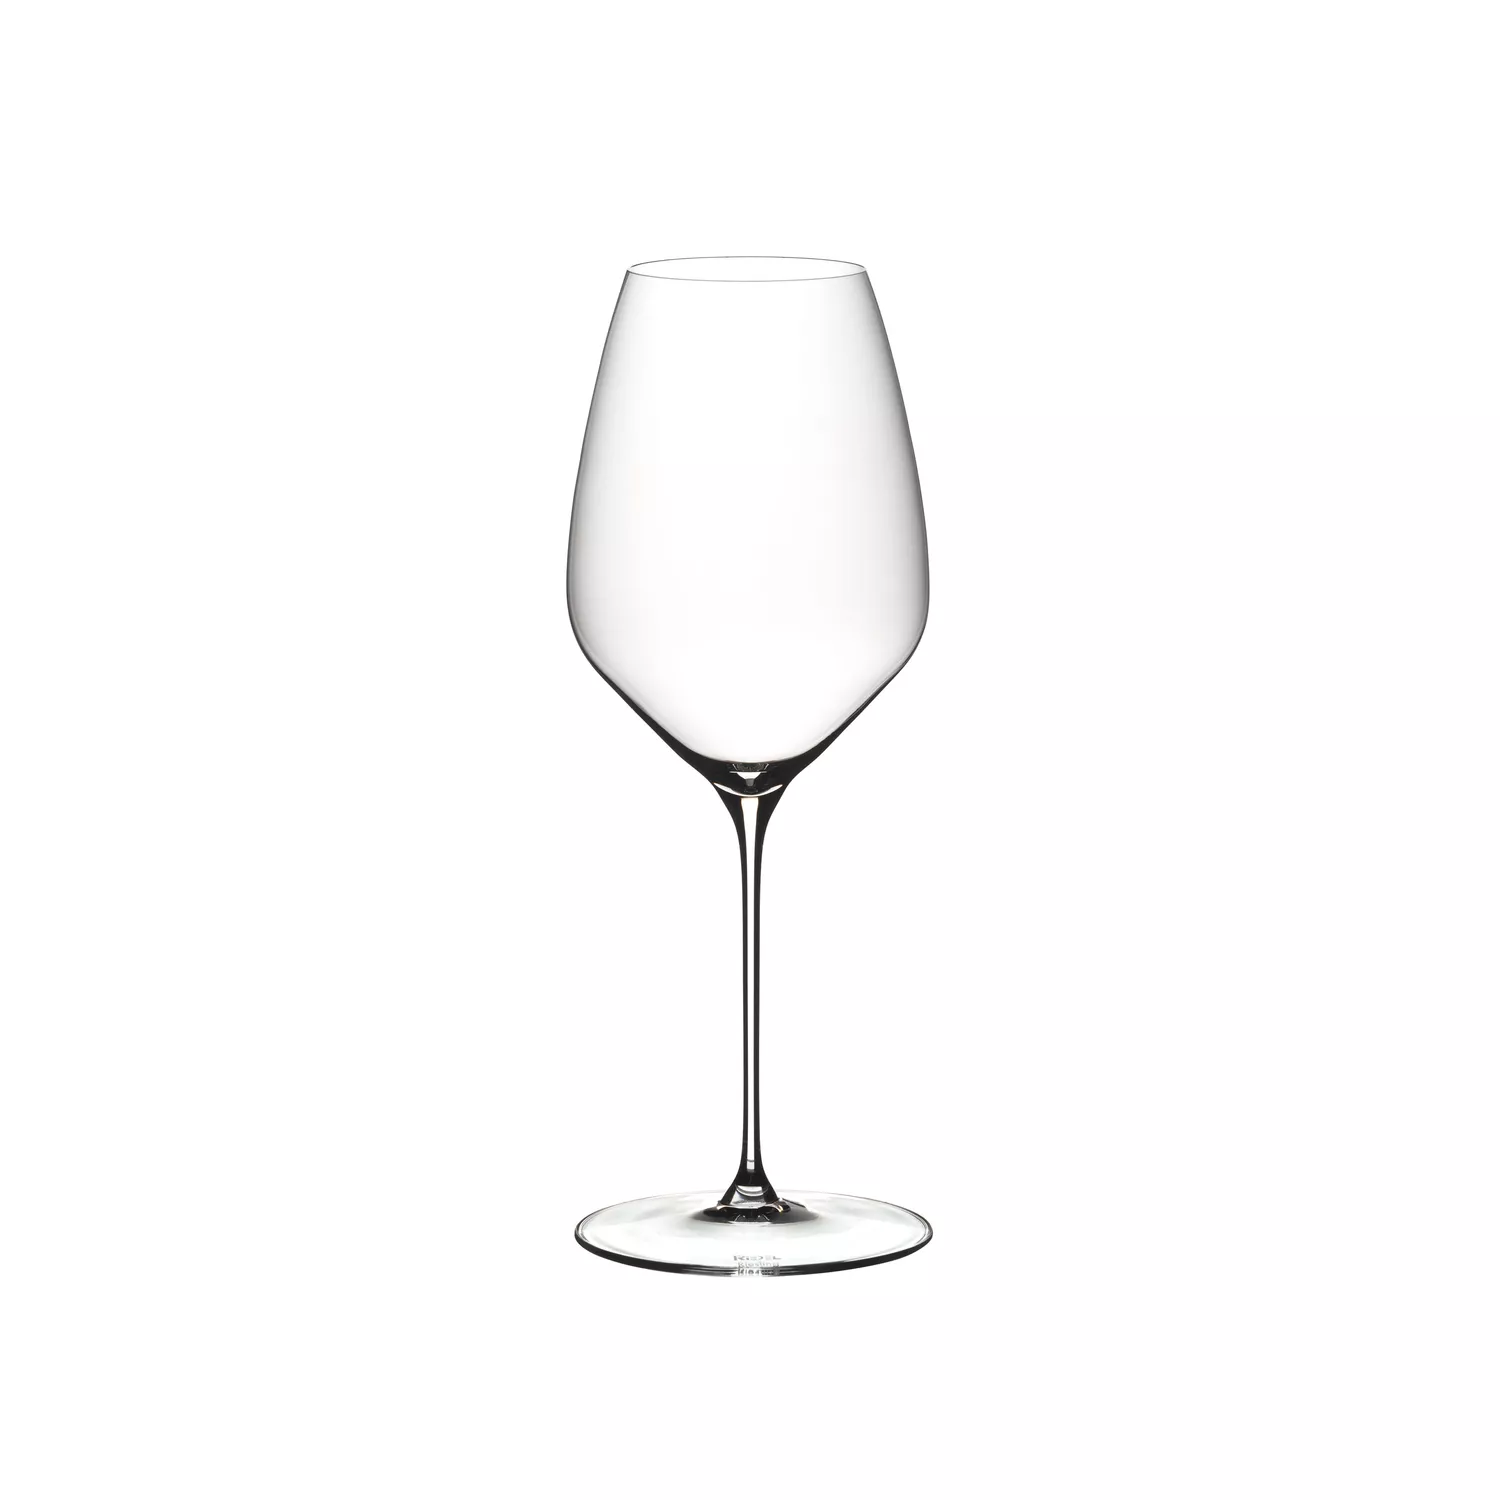 RIEDEL Veloce Riesling Wine Glass, Set of 2